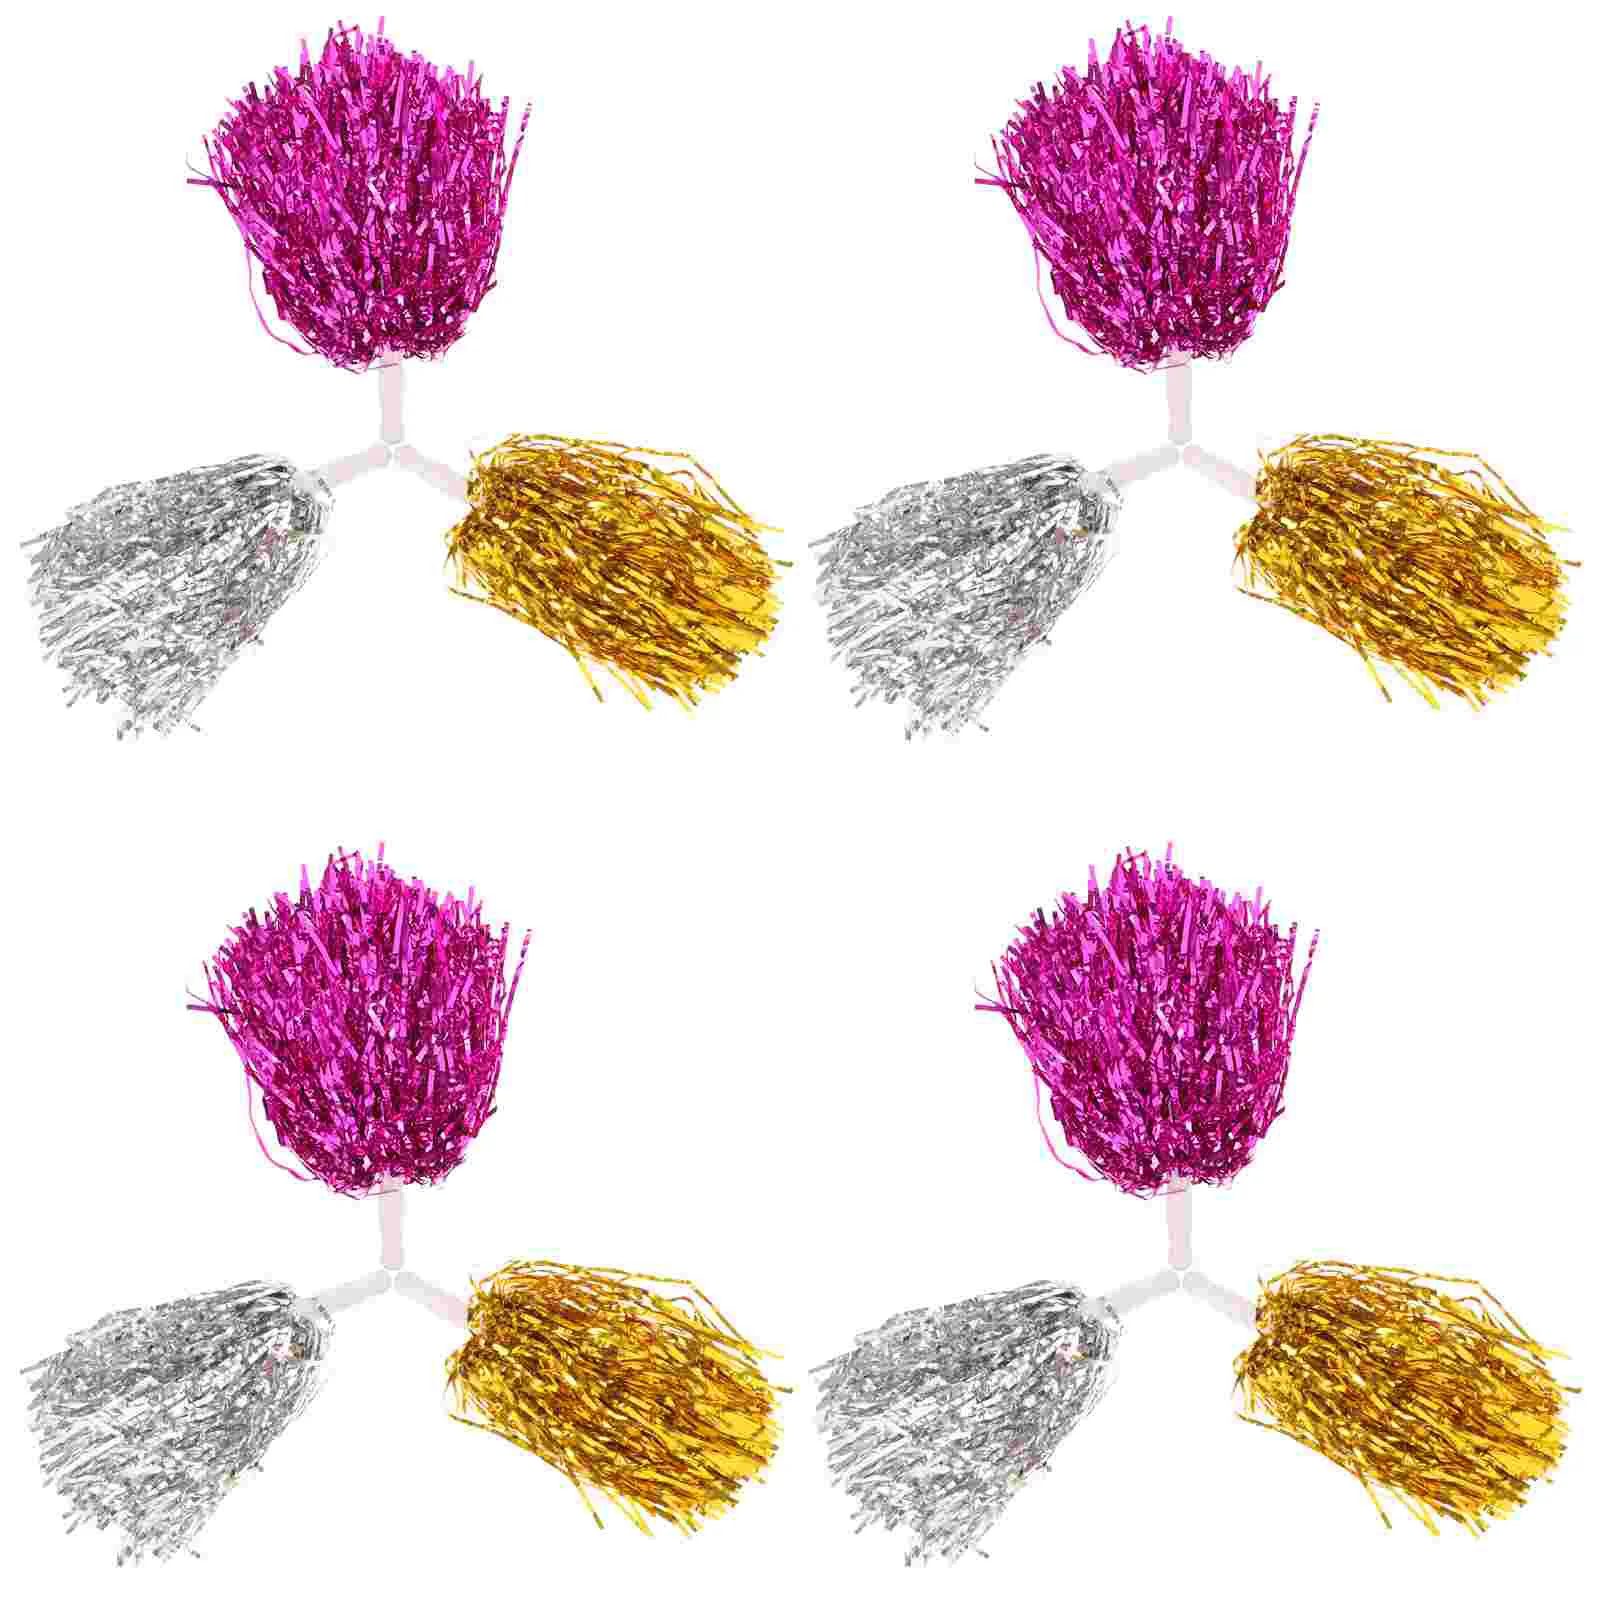 12 Pcs Cheerleading Hand Flower Ballpit Balls Pom Poms Delicate Props Cheering The Pet Cheerleader Compact Sports Meeting 3 pcs gold leaf reusable cheerleader pom poms cheering props bouquet delicate pompom pompoms plastic cheerleading